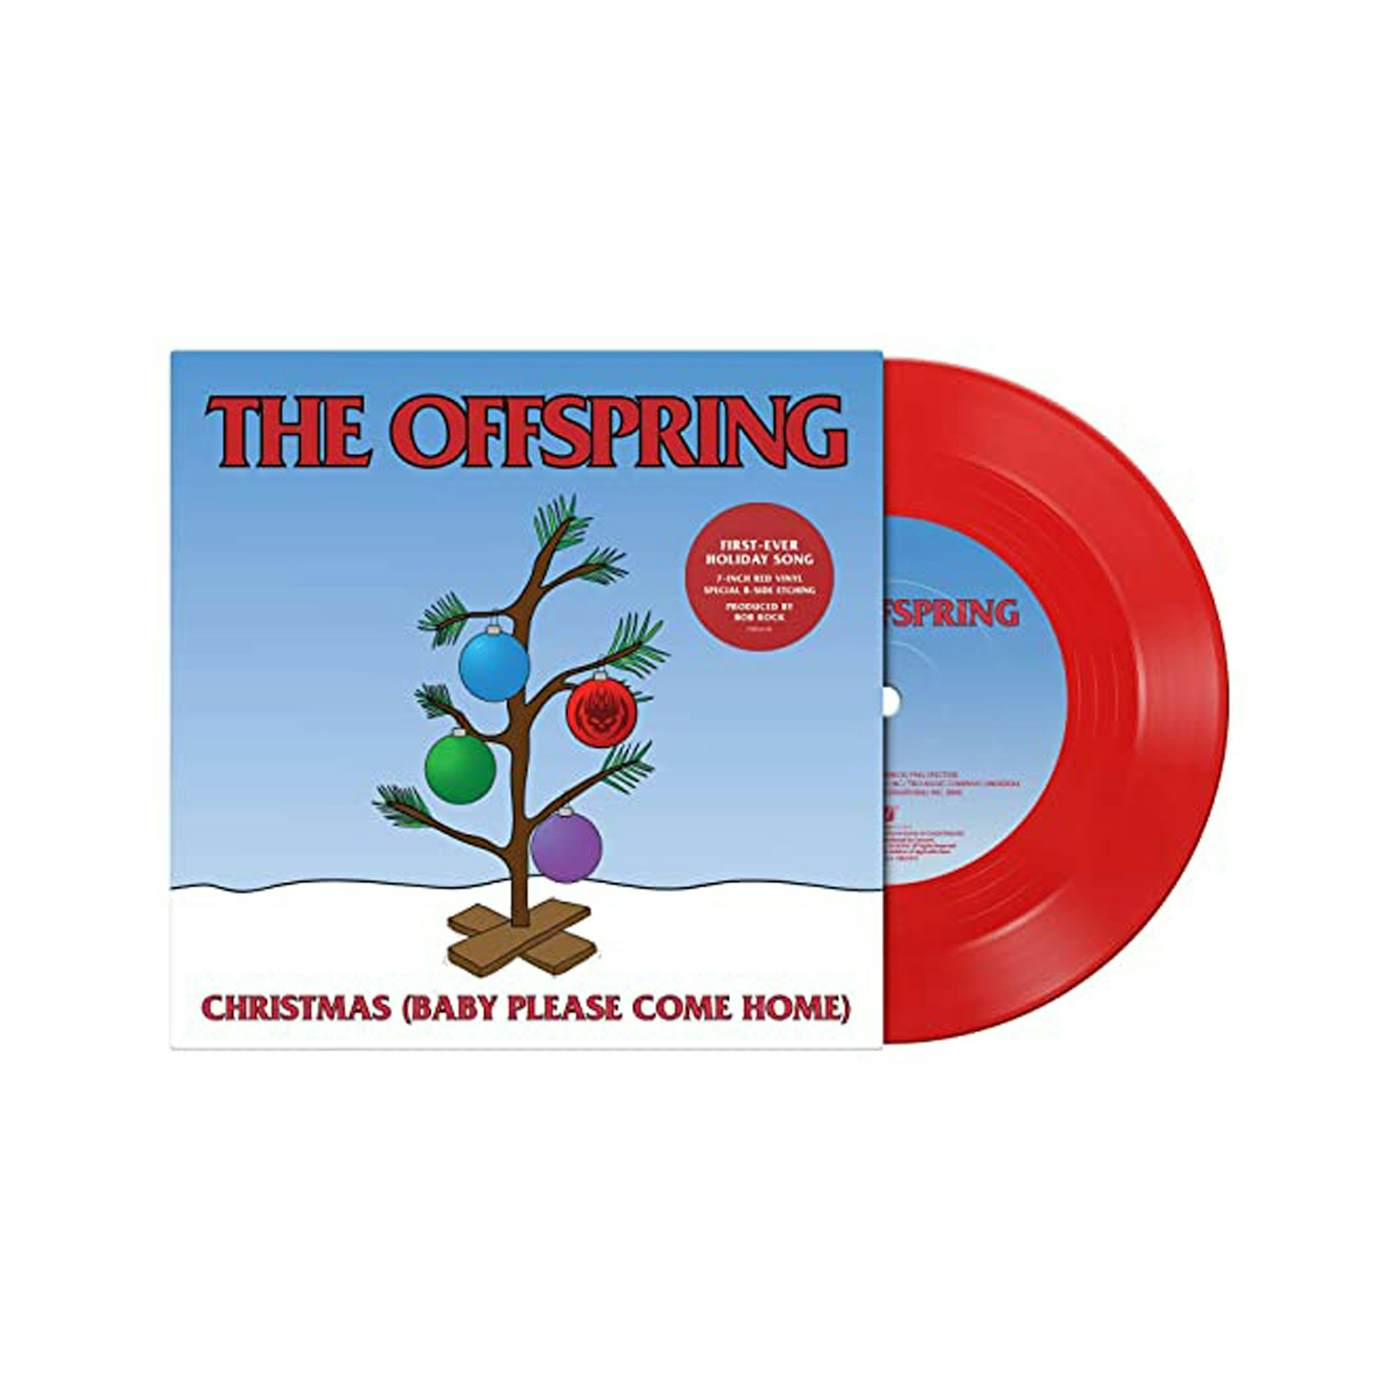 The Offspring Christmas (Baby Please Come Home) Red Vinyl 7"